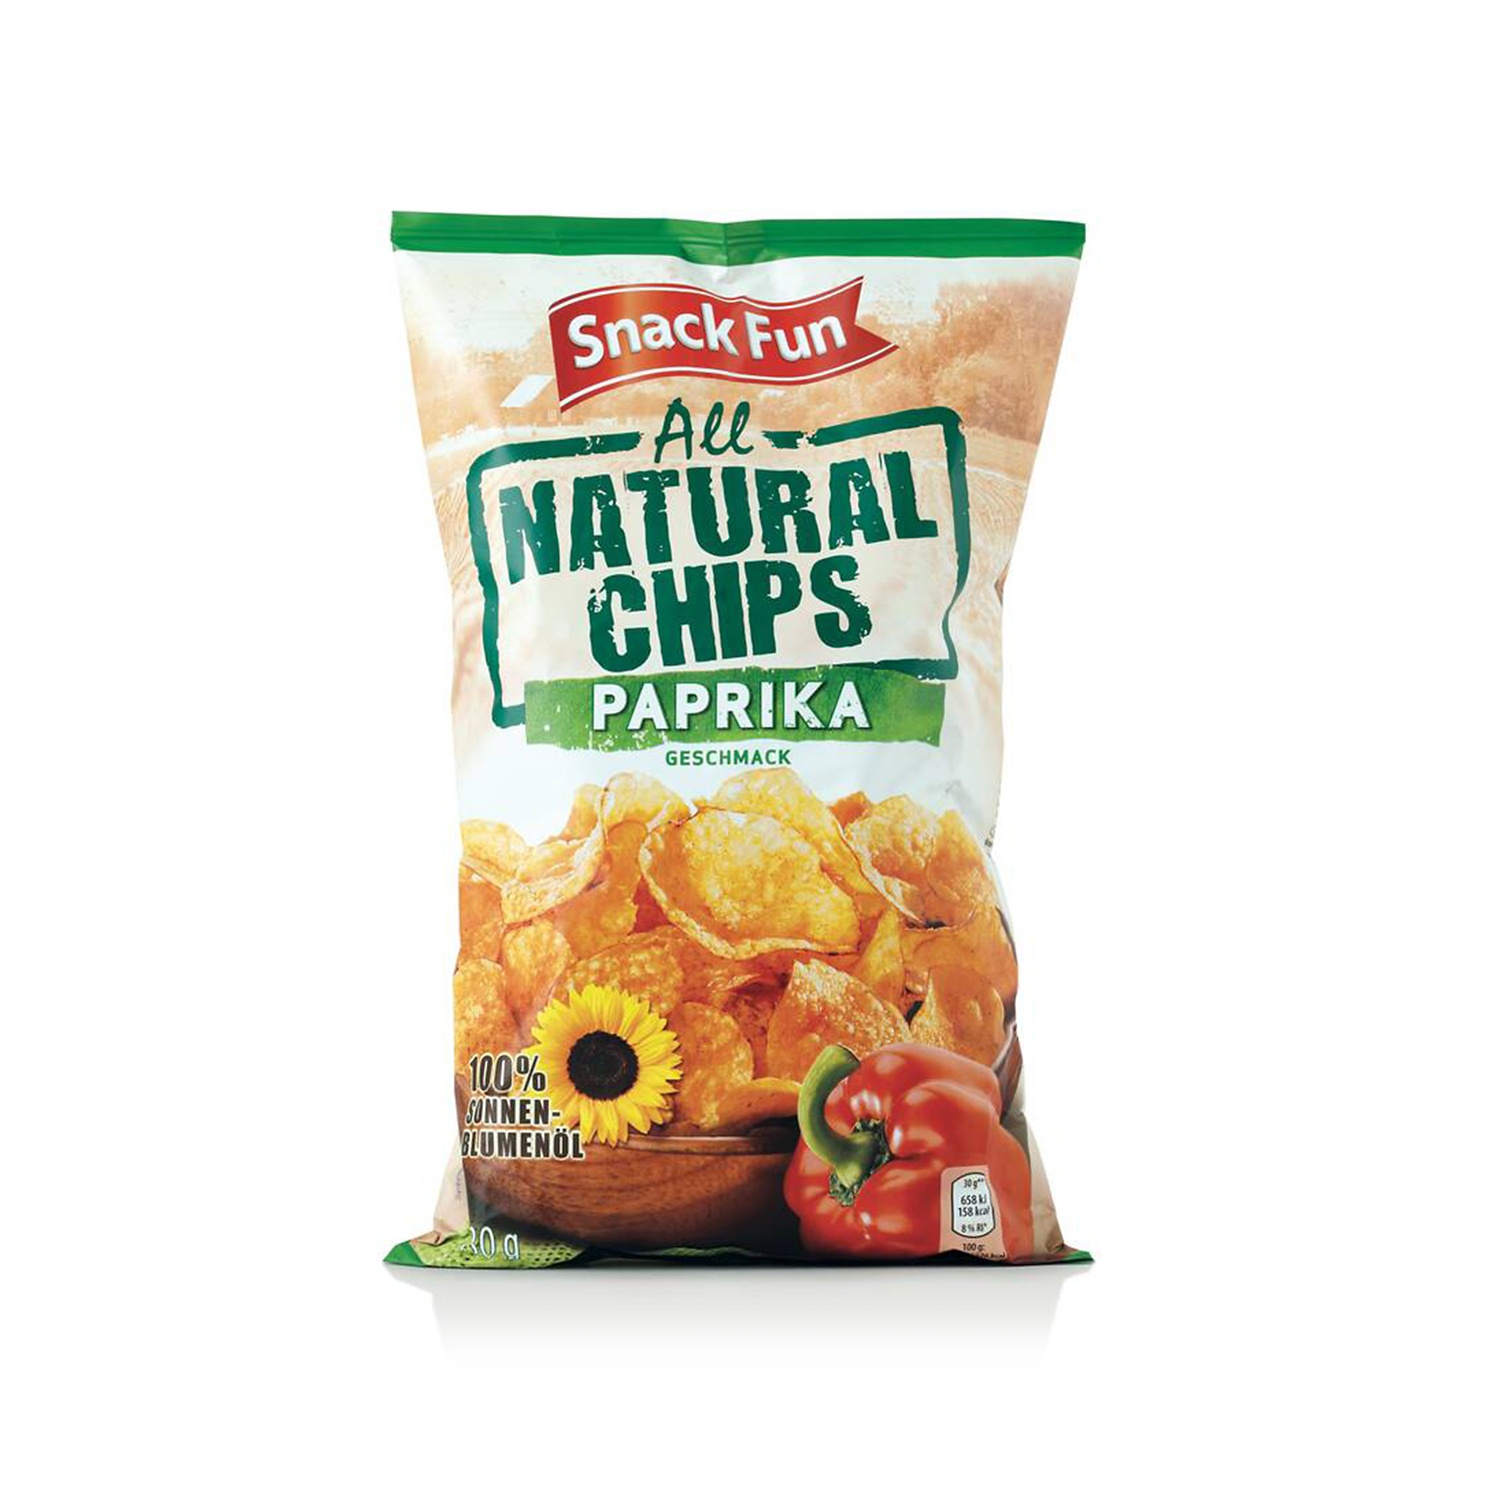 SNACK FUN All Natural Chips alla paprika